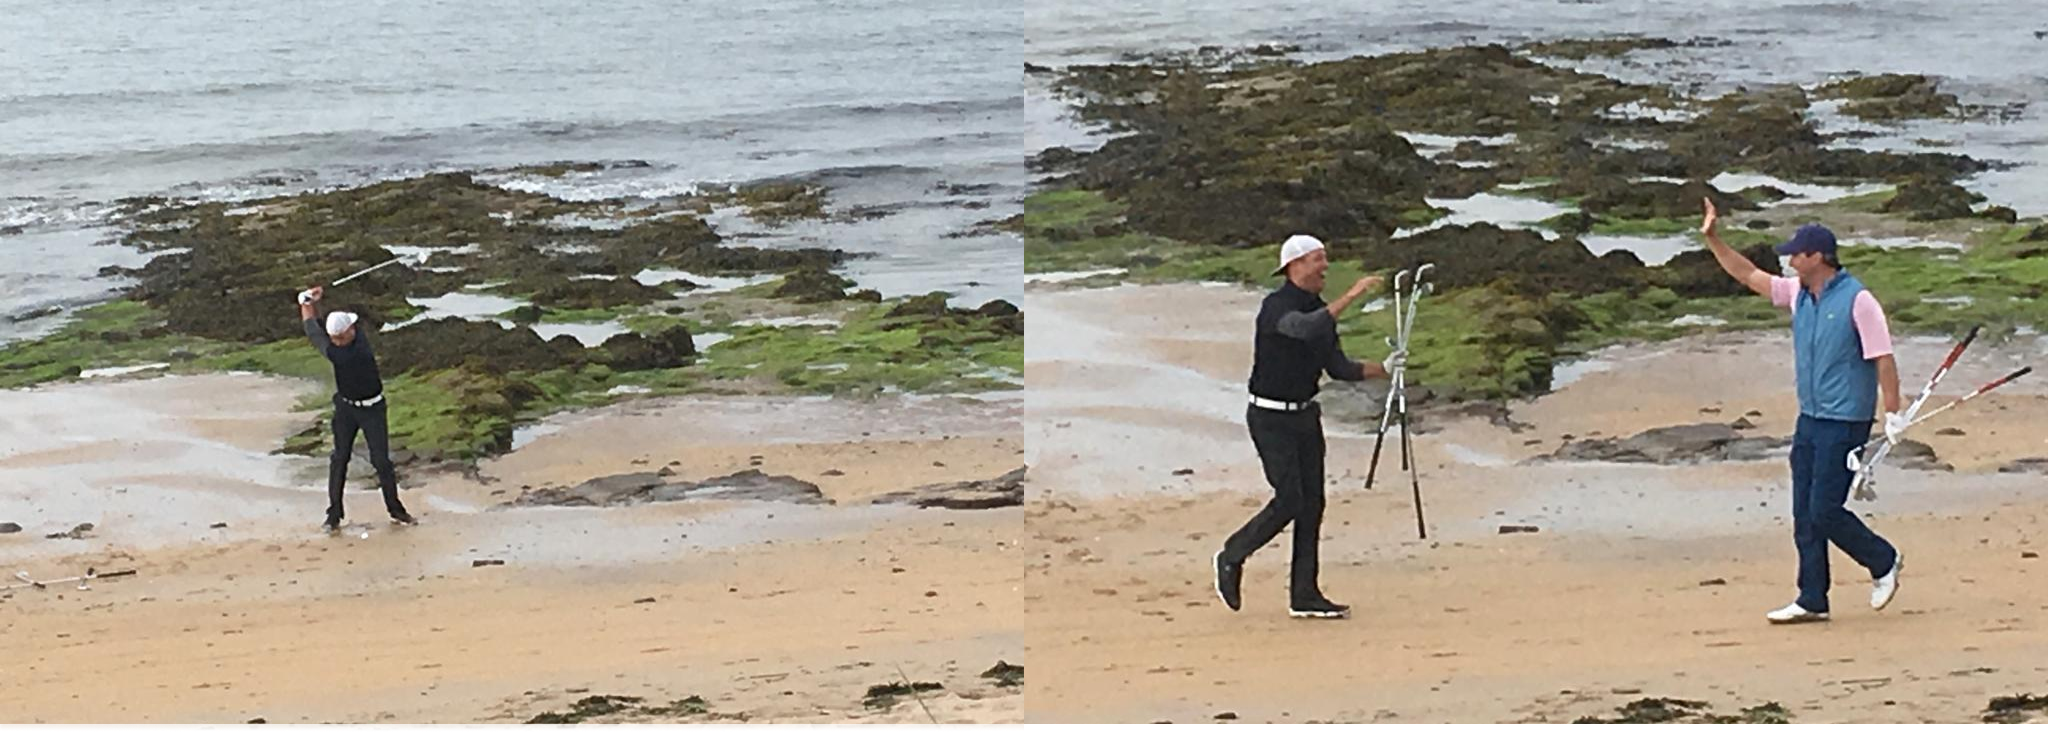 A golfer recovers after landing on the beach next to North Berwick